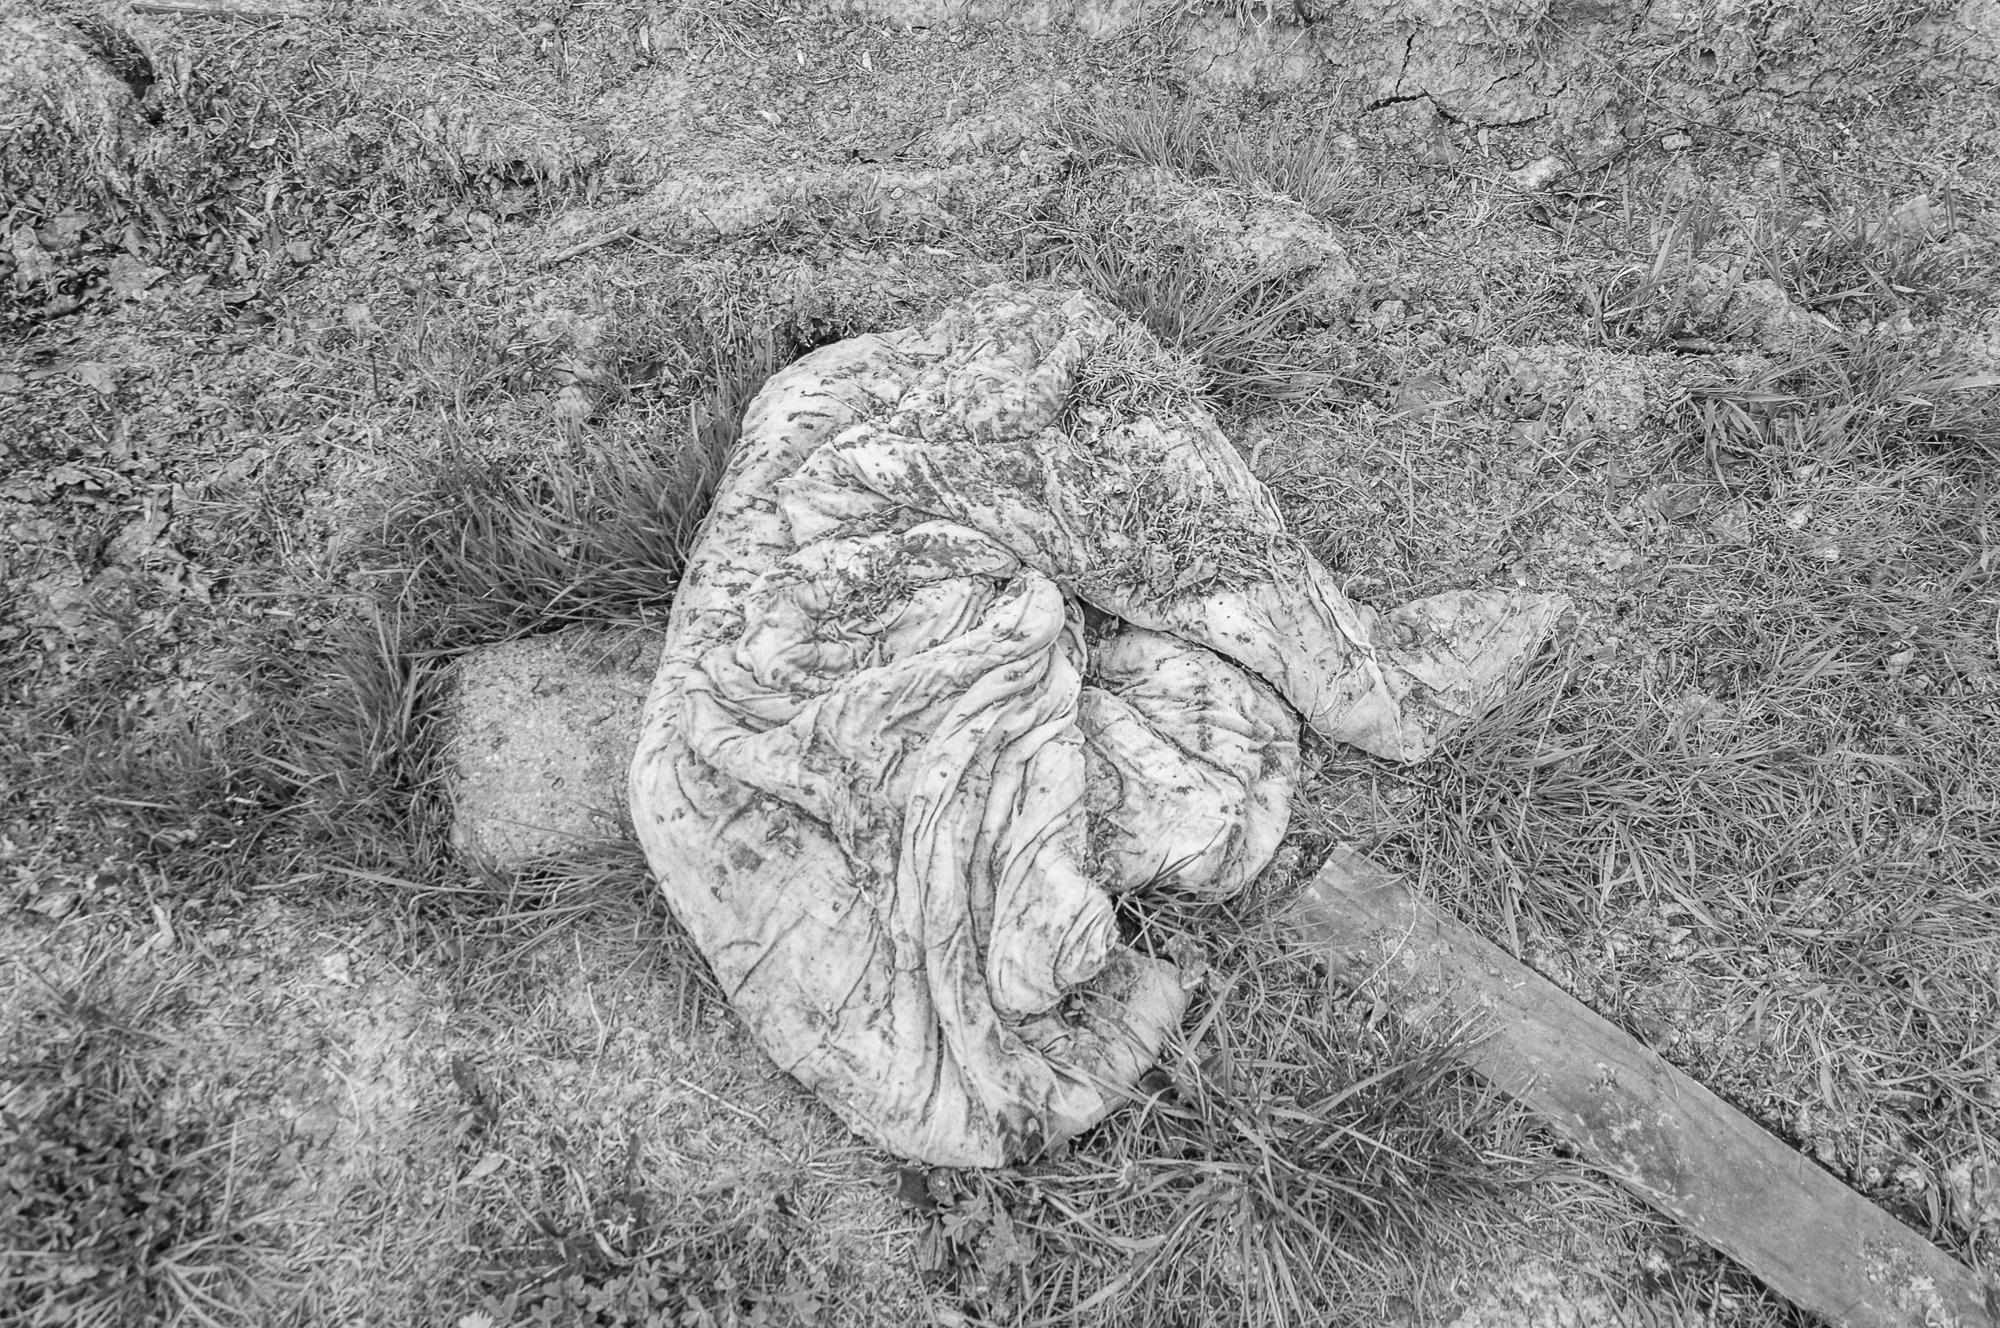 Adam Mazek Photography Warsaw 2018. Post: "Rags." Abstraction. Elephant's fetus.